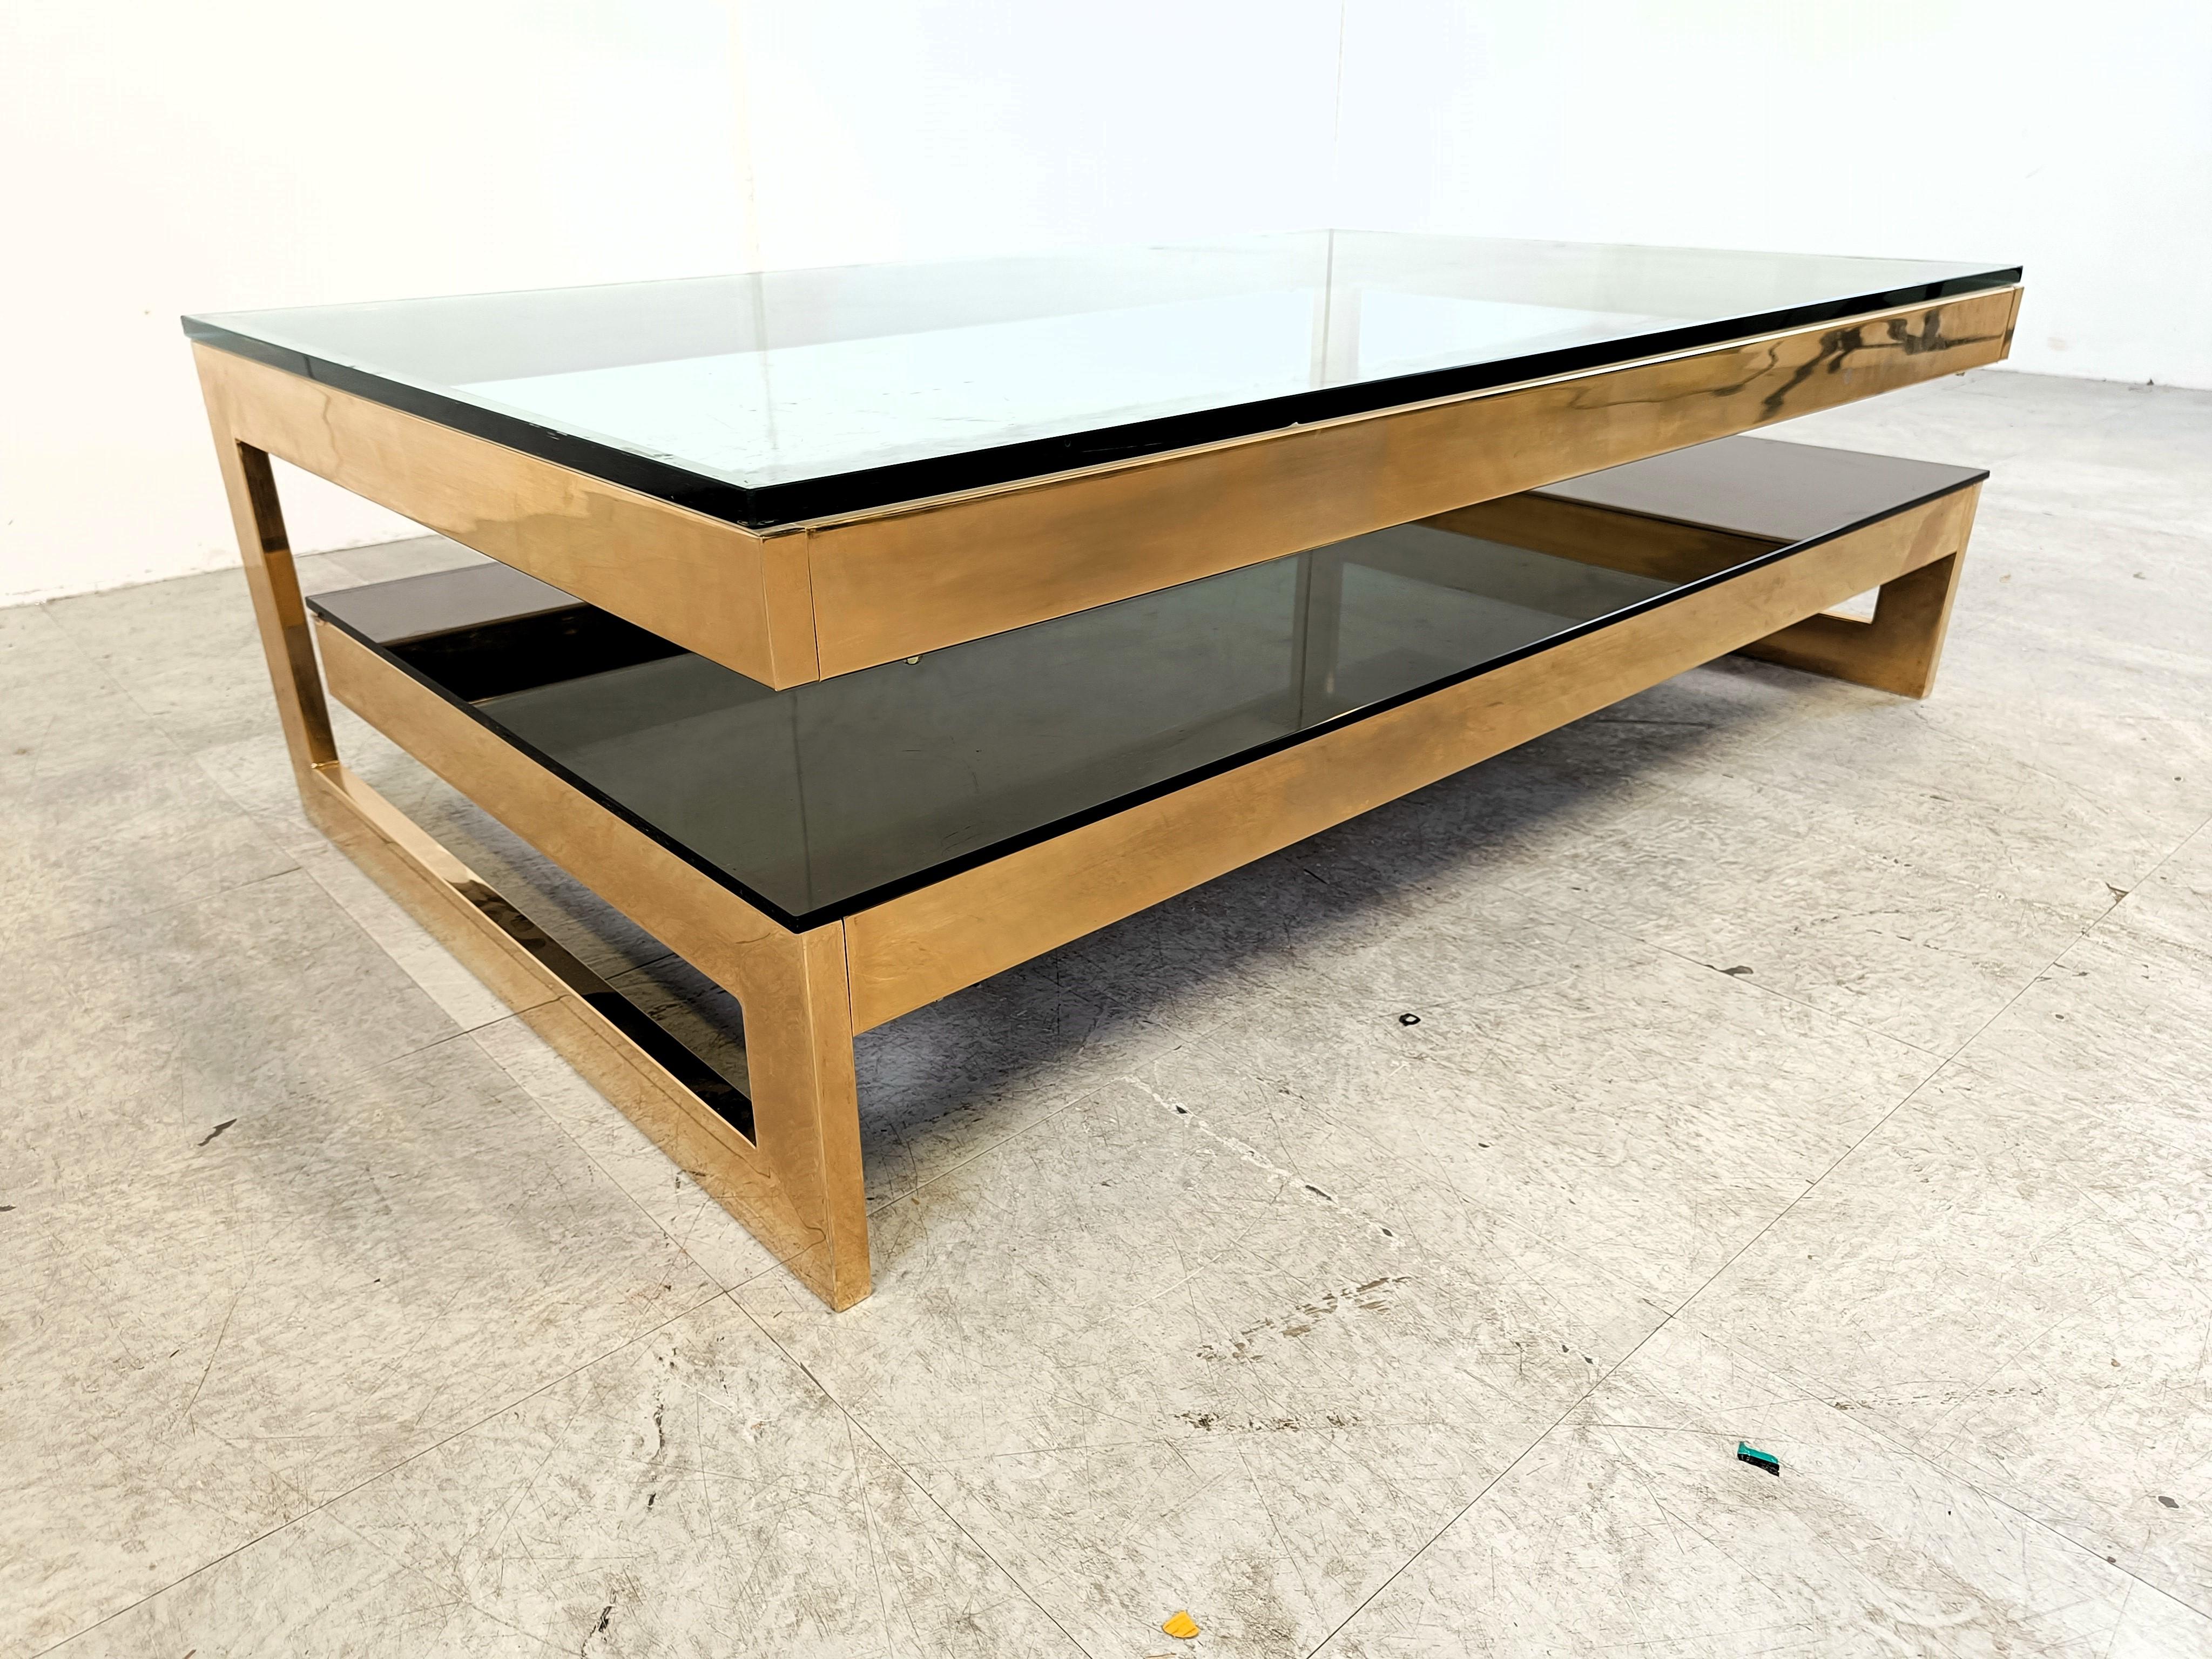 Quality 23kt gold layered and thick clear glass two tier coffee table manufactured by Belgochrom.

This table is a popular model and is referred to as the 'G' model

Belgochrom produced quality furniture pieces with a luxurious appeal.

Good overall